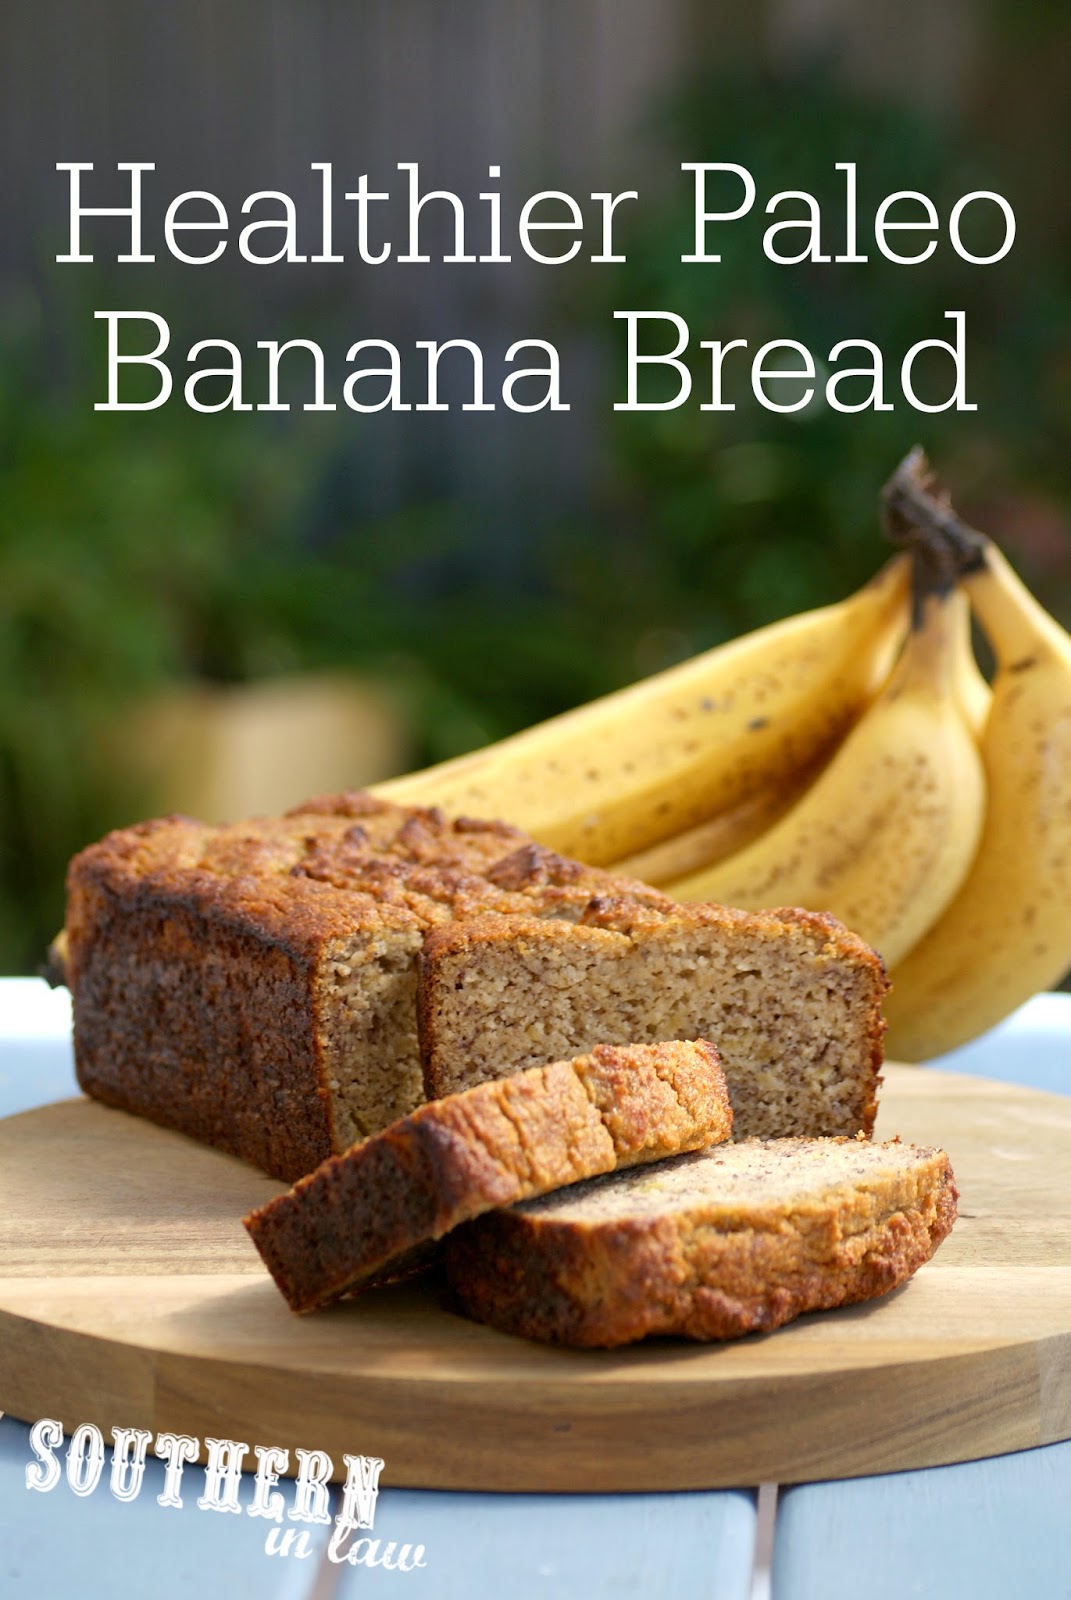 Southern In Law: Recipe: The Best Healthy Paleo Banana Bread